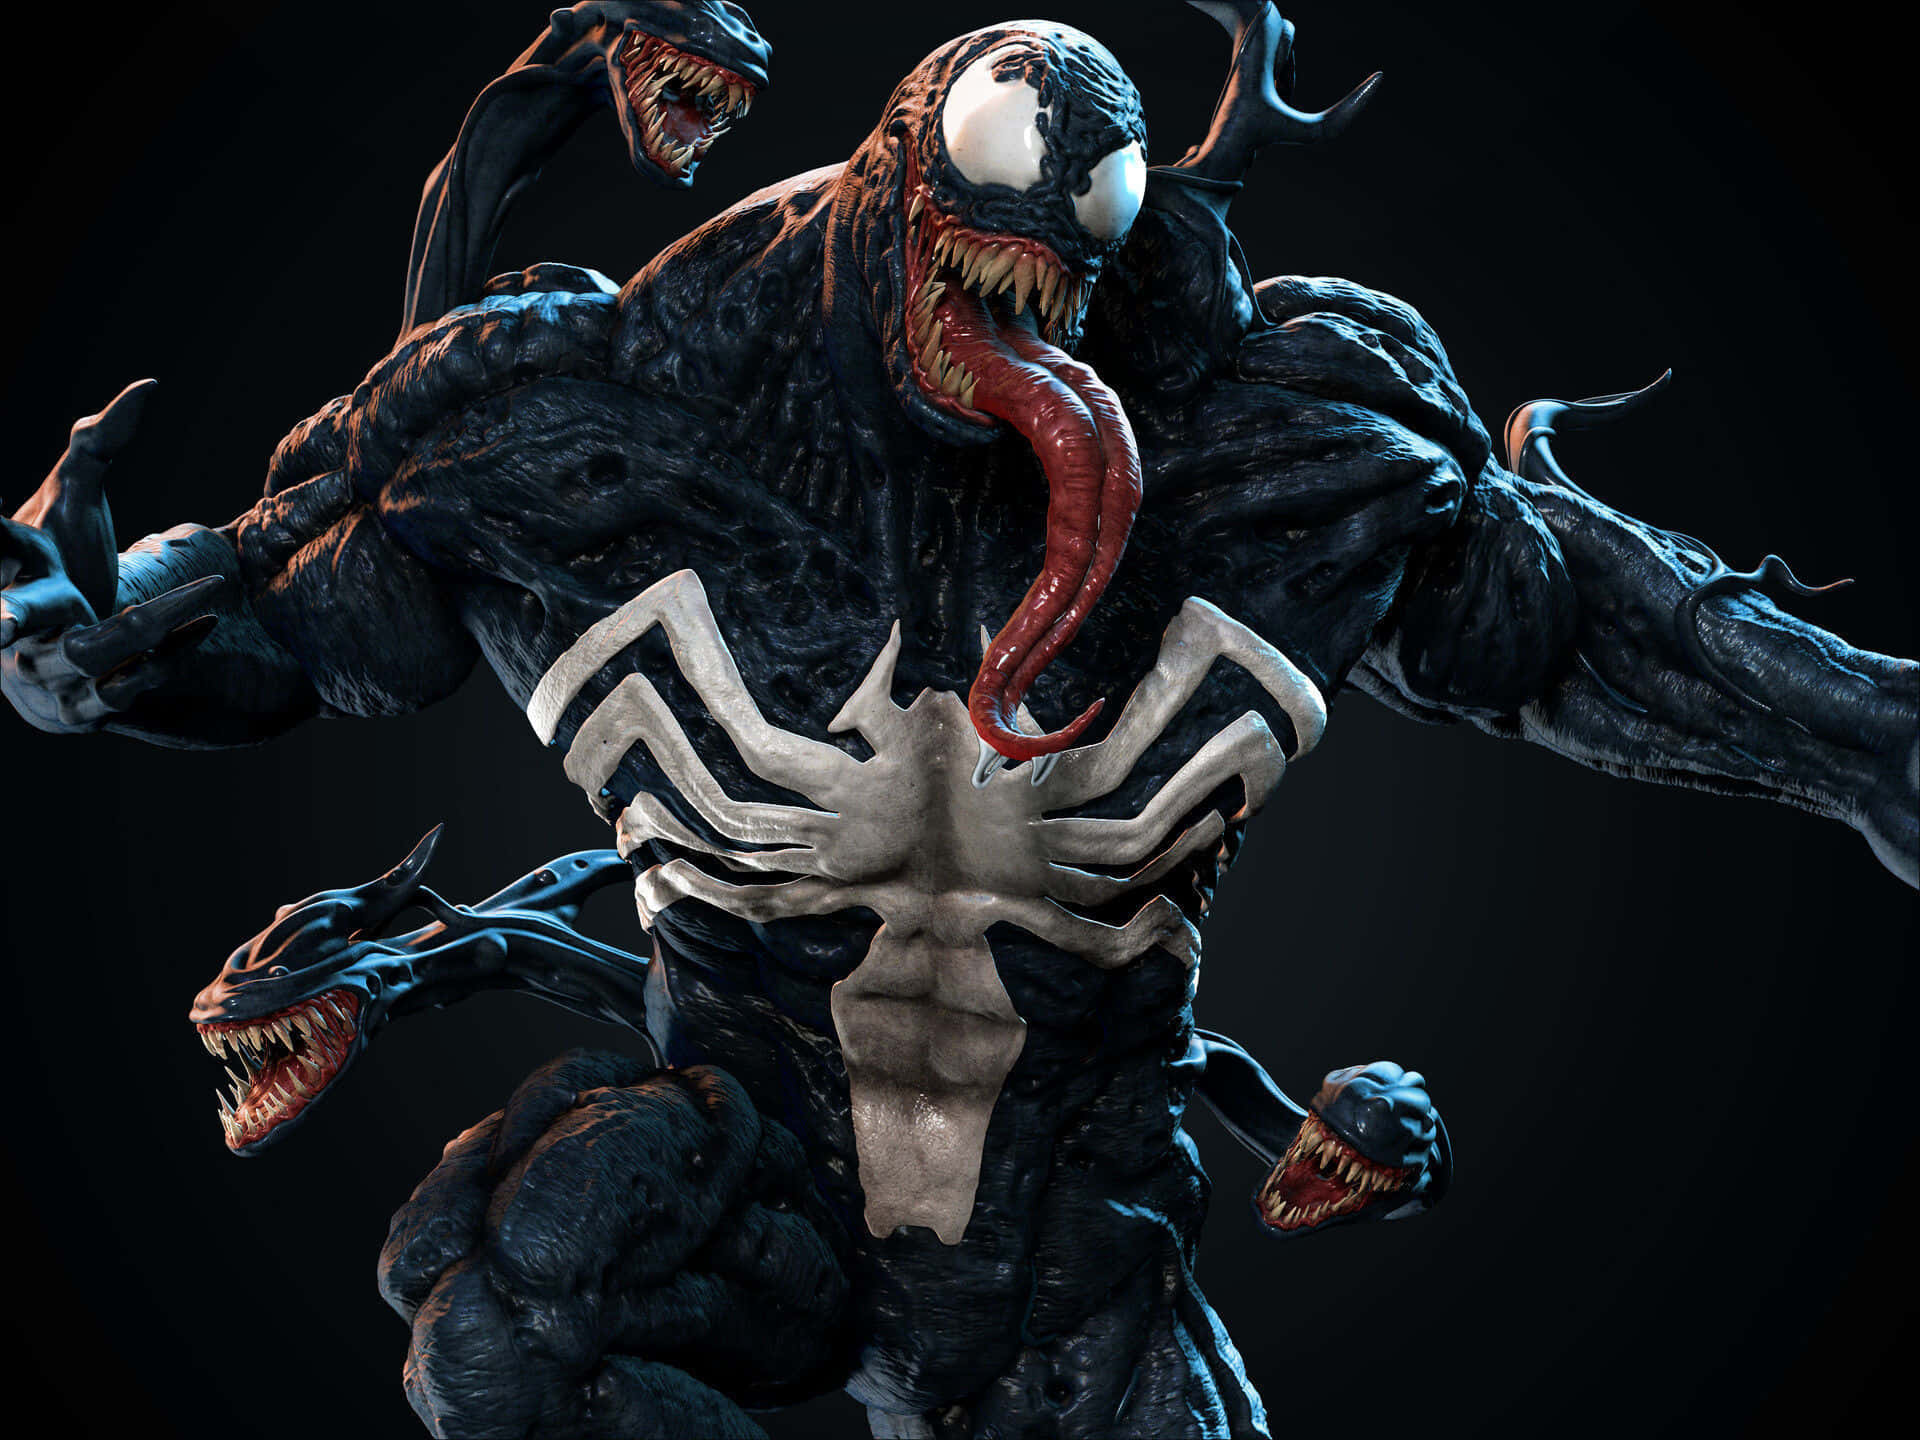 An intense look at the powerful superhero Venom portrayed by Tom Hardy